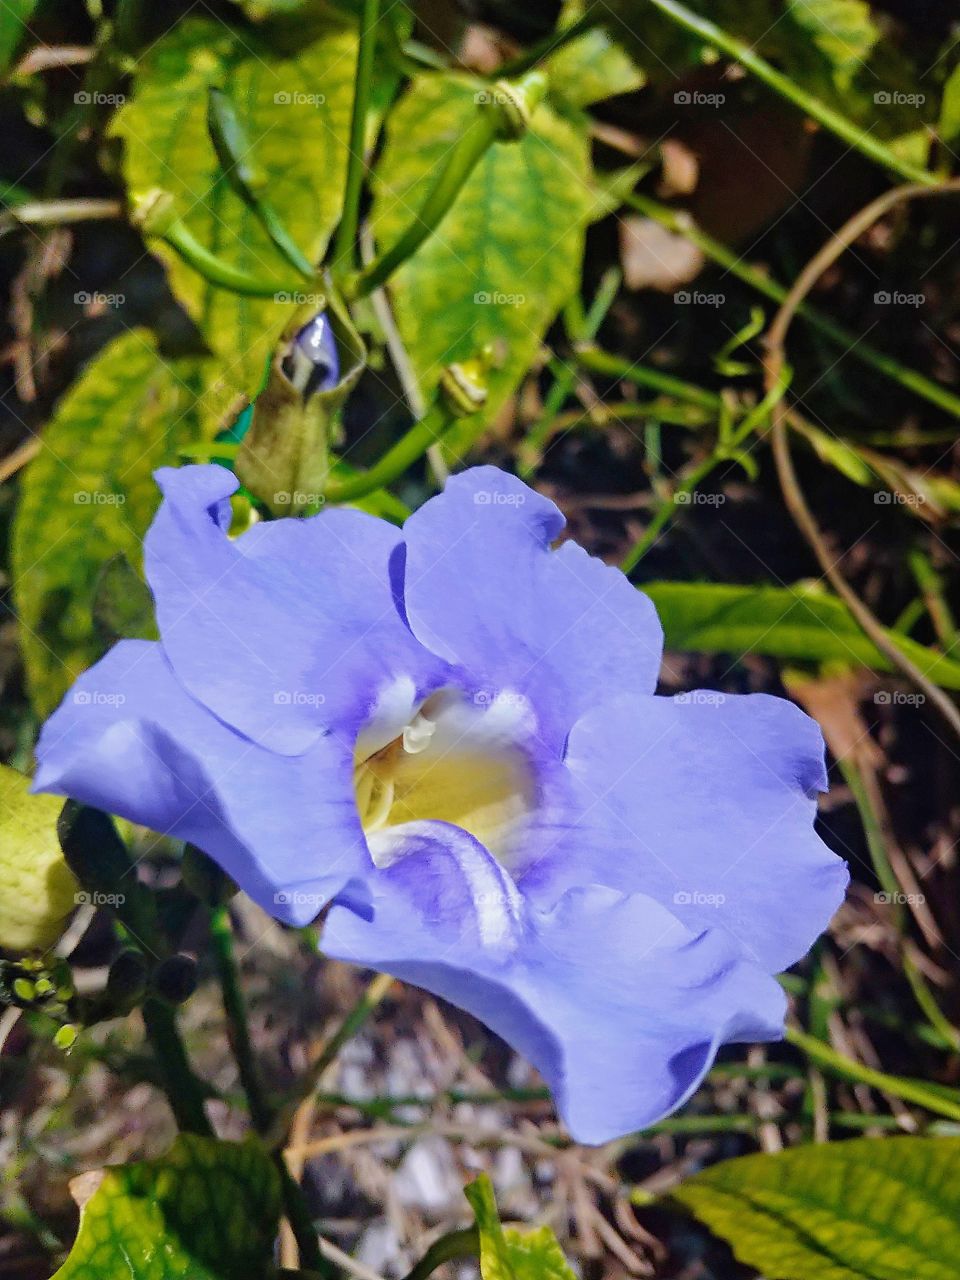 Purple flower with bright yellow center on a vine with bright green and yellow leaves in the background.